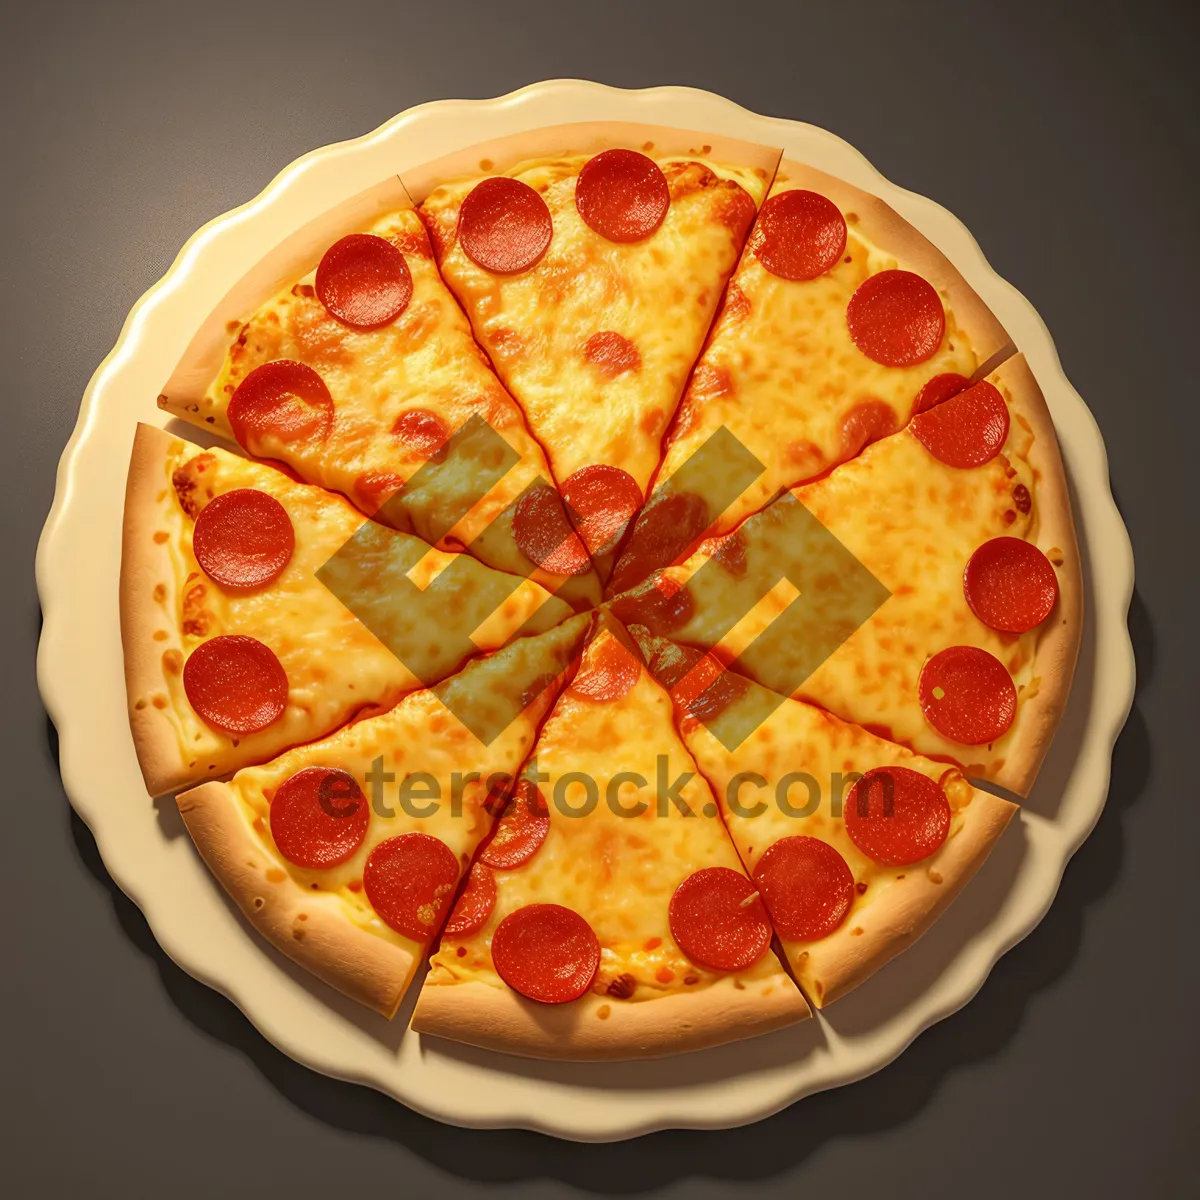 Picture of Delicious Gourmet Pizza with Crispy Crust